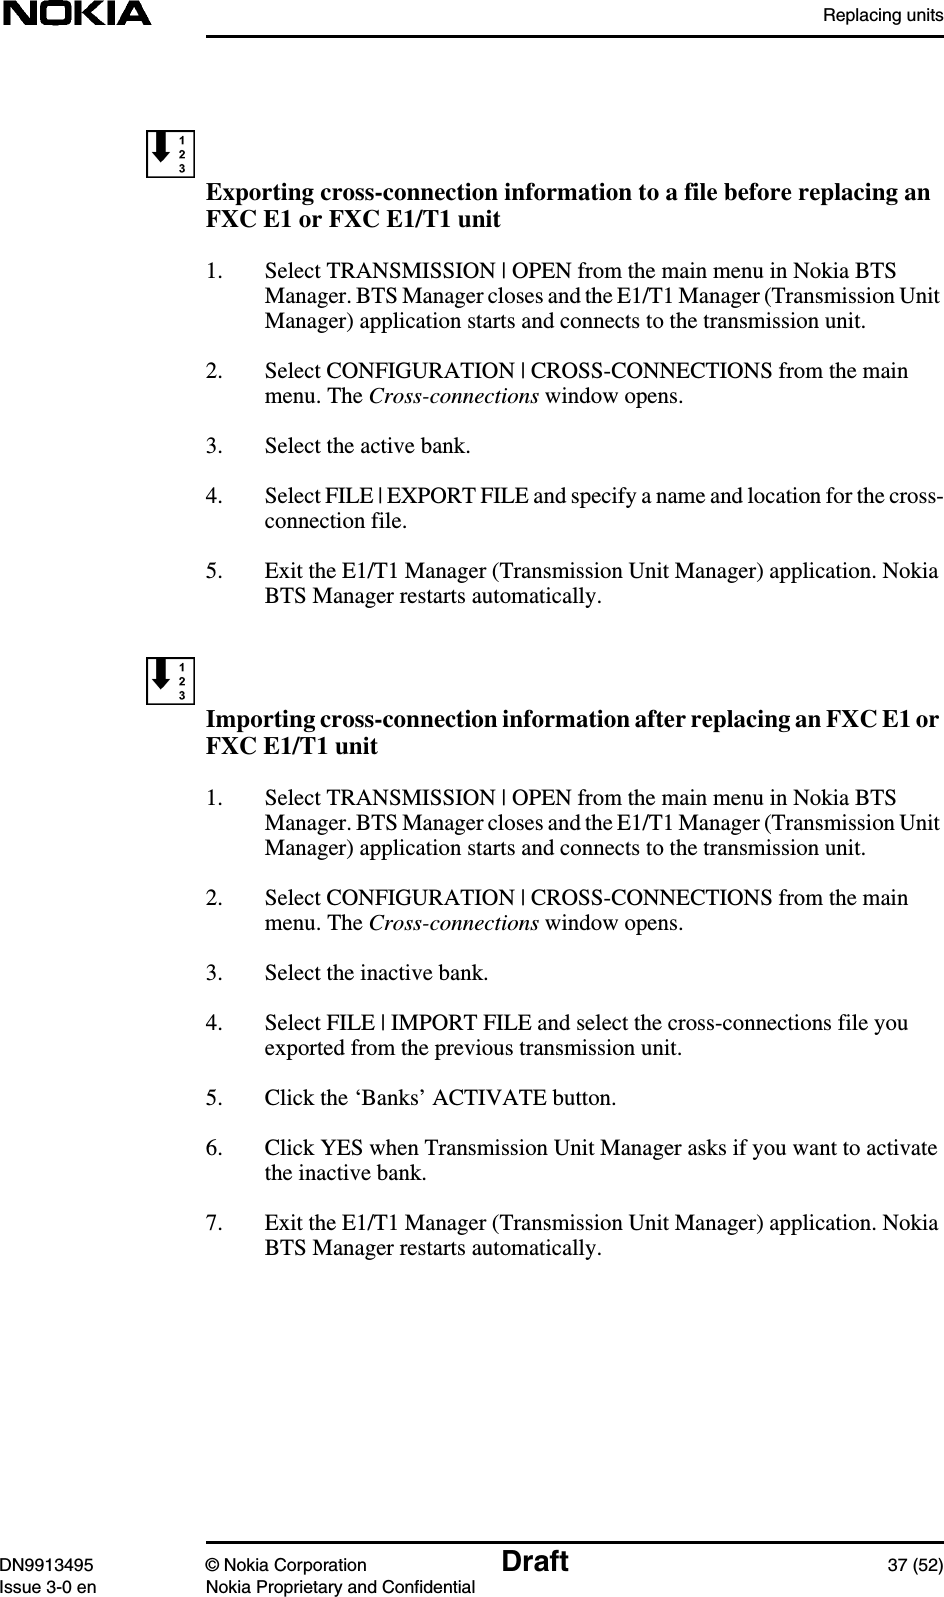 Replacing unitsDN9913495 © Nokia Corporation Draft 37 (52)Issue 3-0 en Nokia Proprietary and ConfidentialExporting cross-connection information to a file before replacing anFXC E1 or FXC E1/T1 unit1. Select TRANSMISSION | OPEN from the main menu in Nokia BTSManager. BTS Manager closes and the E1/T1 Manager (Transmission UnitManager) application starts and connects to the transmission unit.2. Select CONFIGURATION | CROSS-CONNECTIONS from the mainmenu. The Cross-connections window opens.3. Select the active bank.4. Select FILE | EXPORT FILE and specify a name and location for the cross-connection file.5. Exit the E1/T1 Manager (Transmission Unit Manager) application. NokiaBTS Manager restarts automatically.Importing cross-connection information after replacing an FXC E1 orFXC E1/T1 unit1. Select TRANSMISSION | OPEN from the main menu in Nokia BTSManager. BTS Manager closes and the E1/T1 Manager (Transmission UnitManager) application starts and connects to the transmission unit.2. Select CONFIGURATION | CROSS-CONNECTIONS from the mainmenu. The Cross-connections window opens.3. Select the inactive bank.4. Select FILE | IMPORT FILE and select the cross-connections file youexported from the previous transmission unit.5. Click the ‘Banks’ ACTIVATE button.6. Click YES when Transmission Unit Manager asks if you want to activatethe inactive bank.7. Exit the E1/T1 Manager (Transmission Unit Manager) application. NokiaBTS Manager restarts automatically.